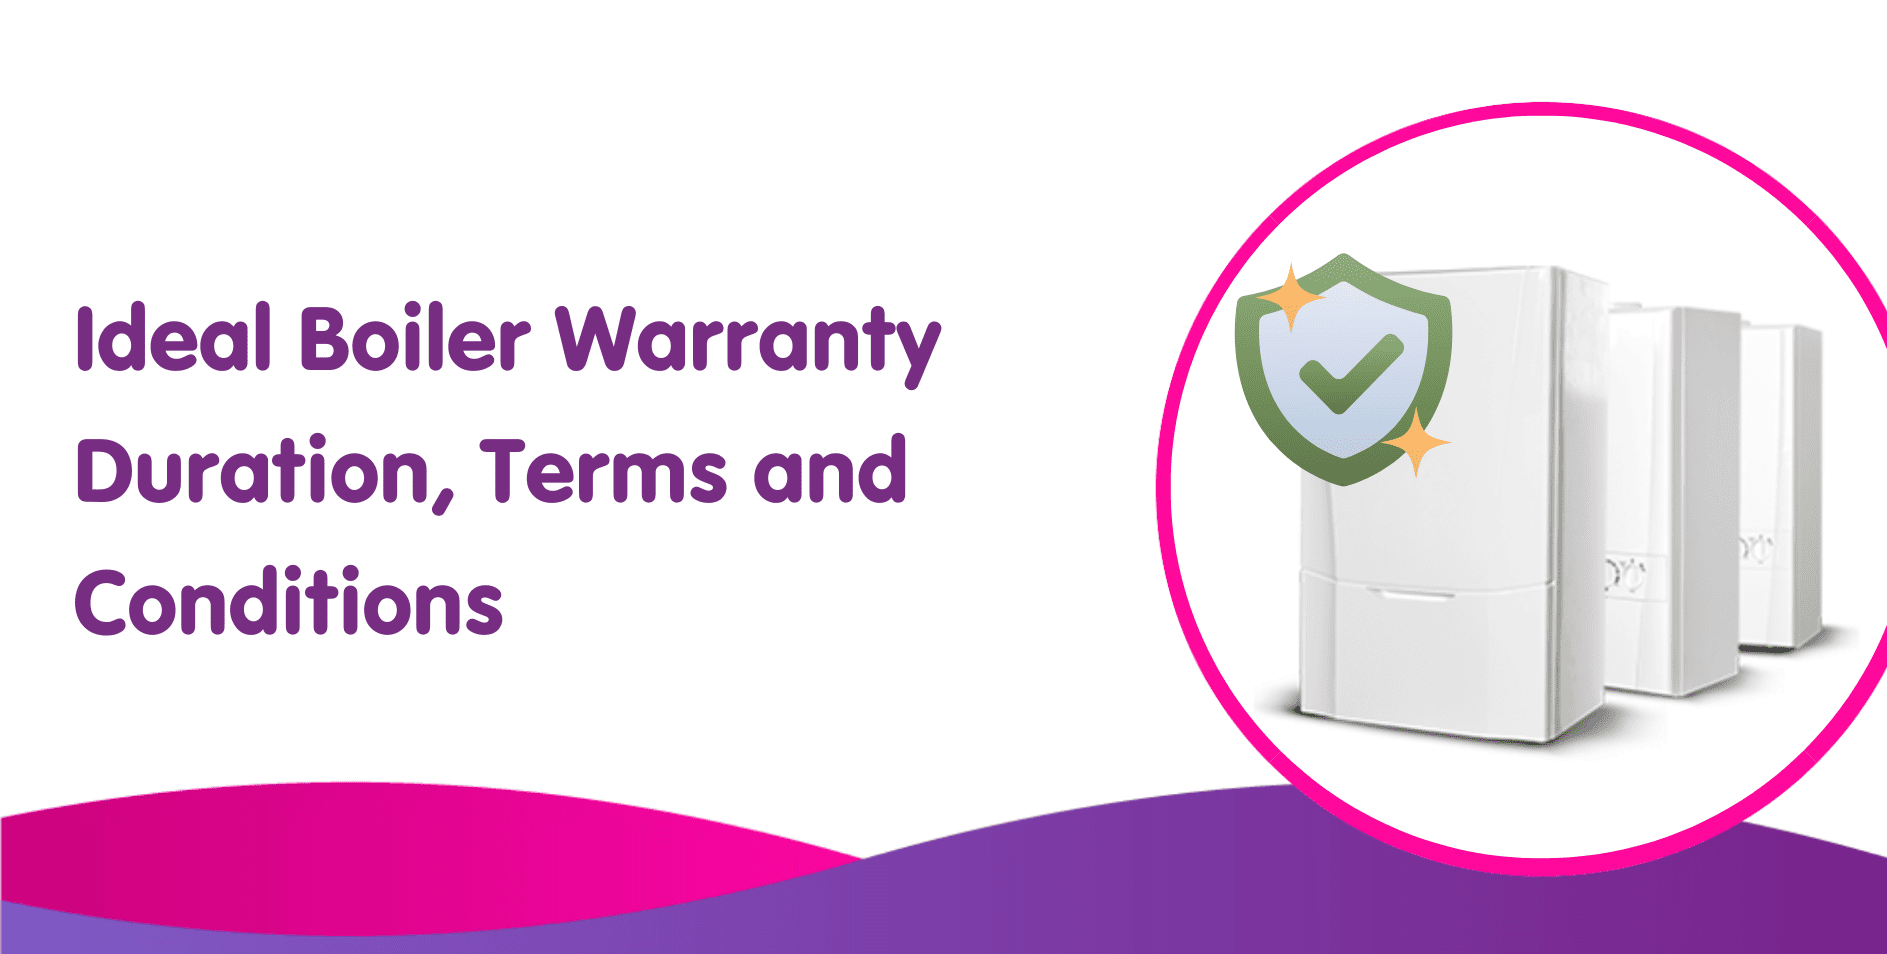 Ideal Boiler Warranty Duration, Terms and Conditions